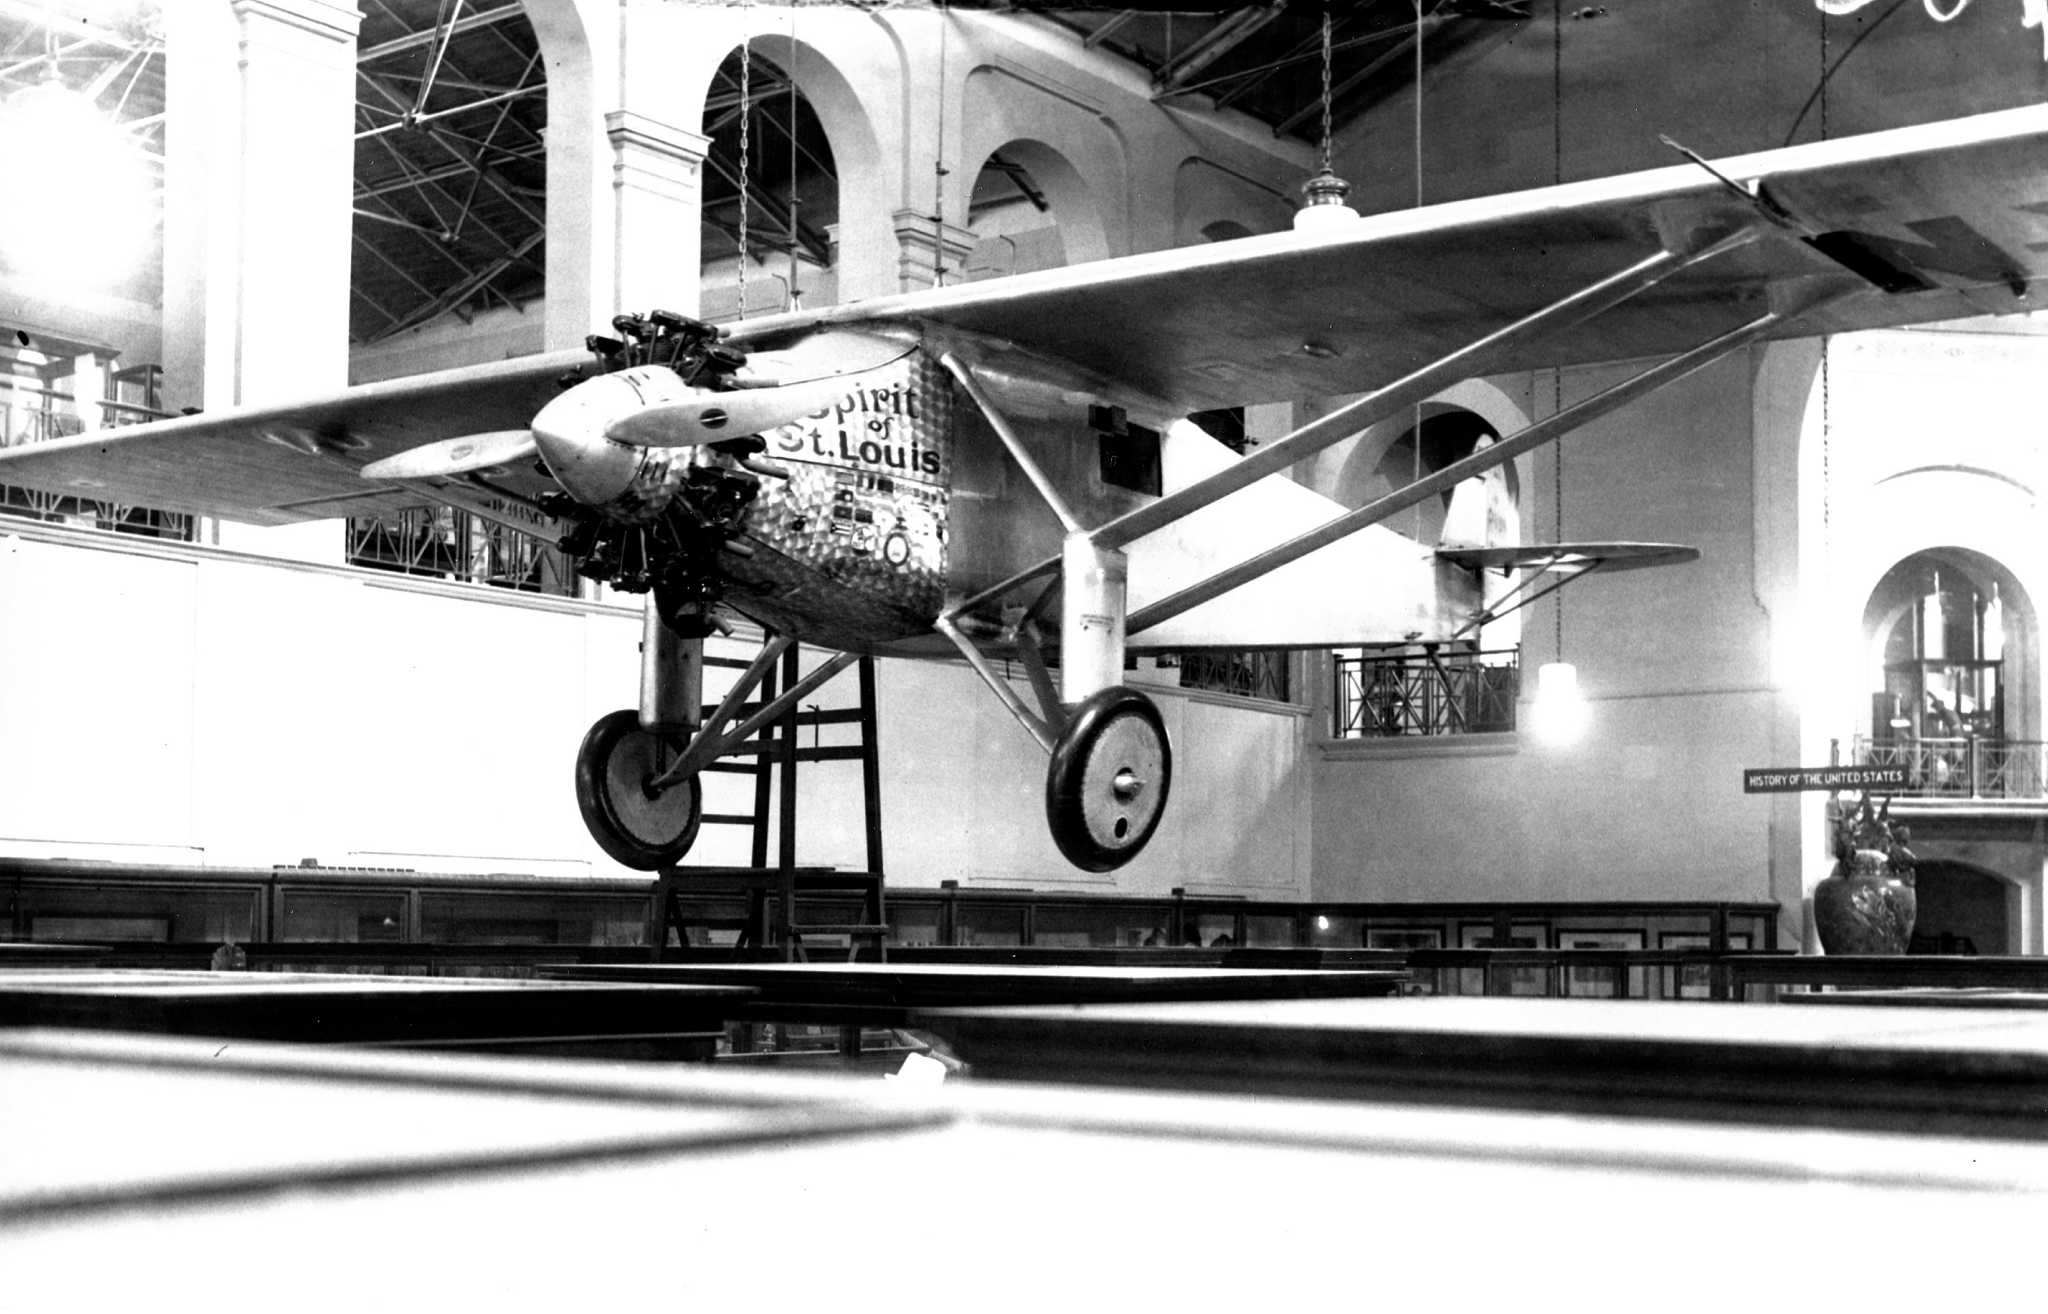 The Queen City Welcomes Charles Lindbergh and His Spirit of St. Louis,  August 6, 1927 - Cincinnati Museum Center